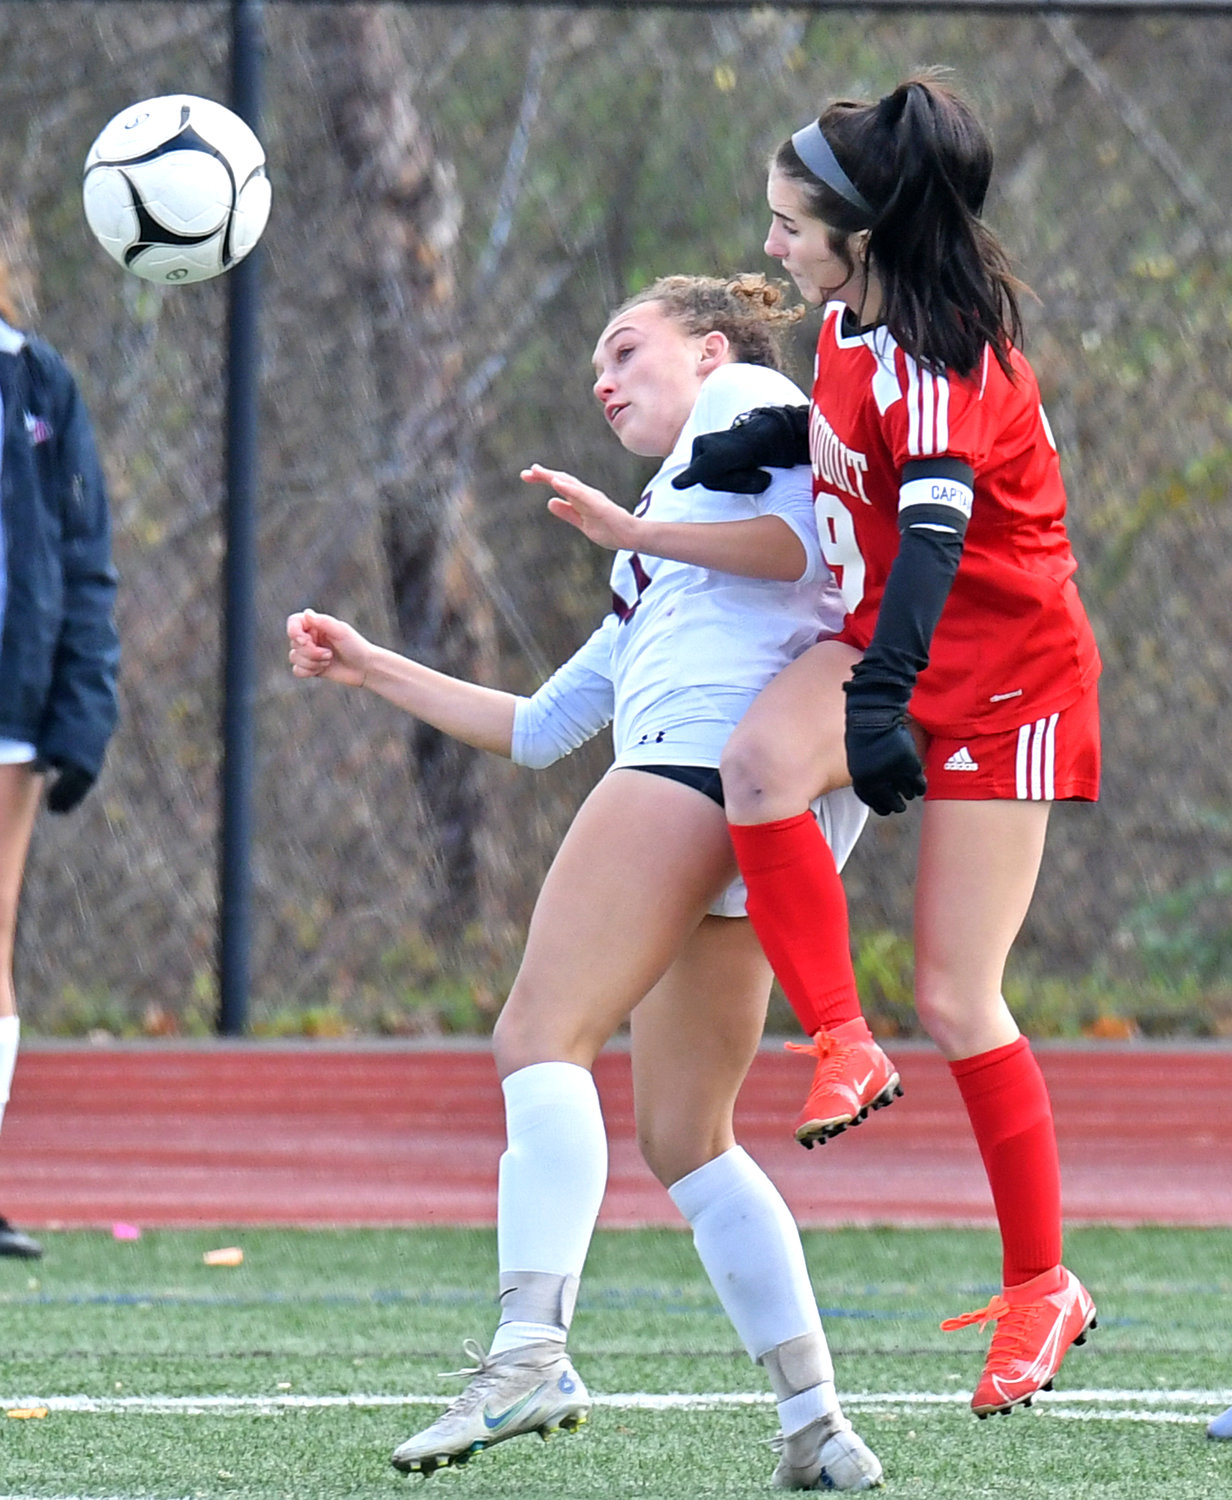 Sauquoit Valley's Celena Sperbeck, right, and Byron-Bergen's Emma Starowitz fight for position on the ball in the first half of the Class C state semifinals game Saturday at Cortland High School. Starowitz scored but Sauquoit won 2-1.